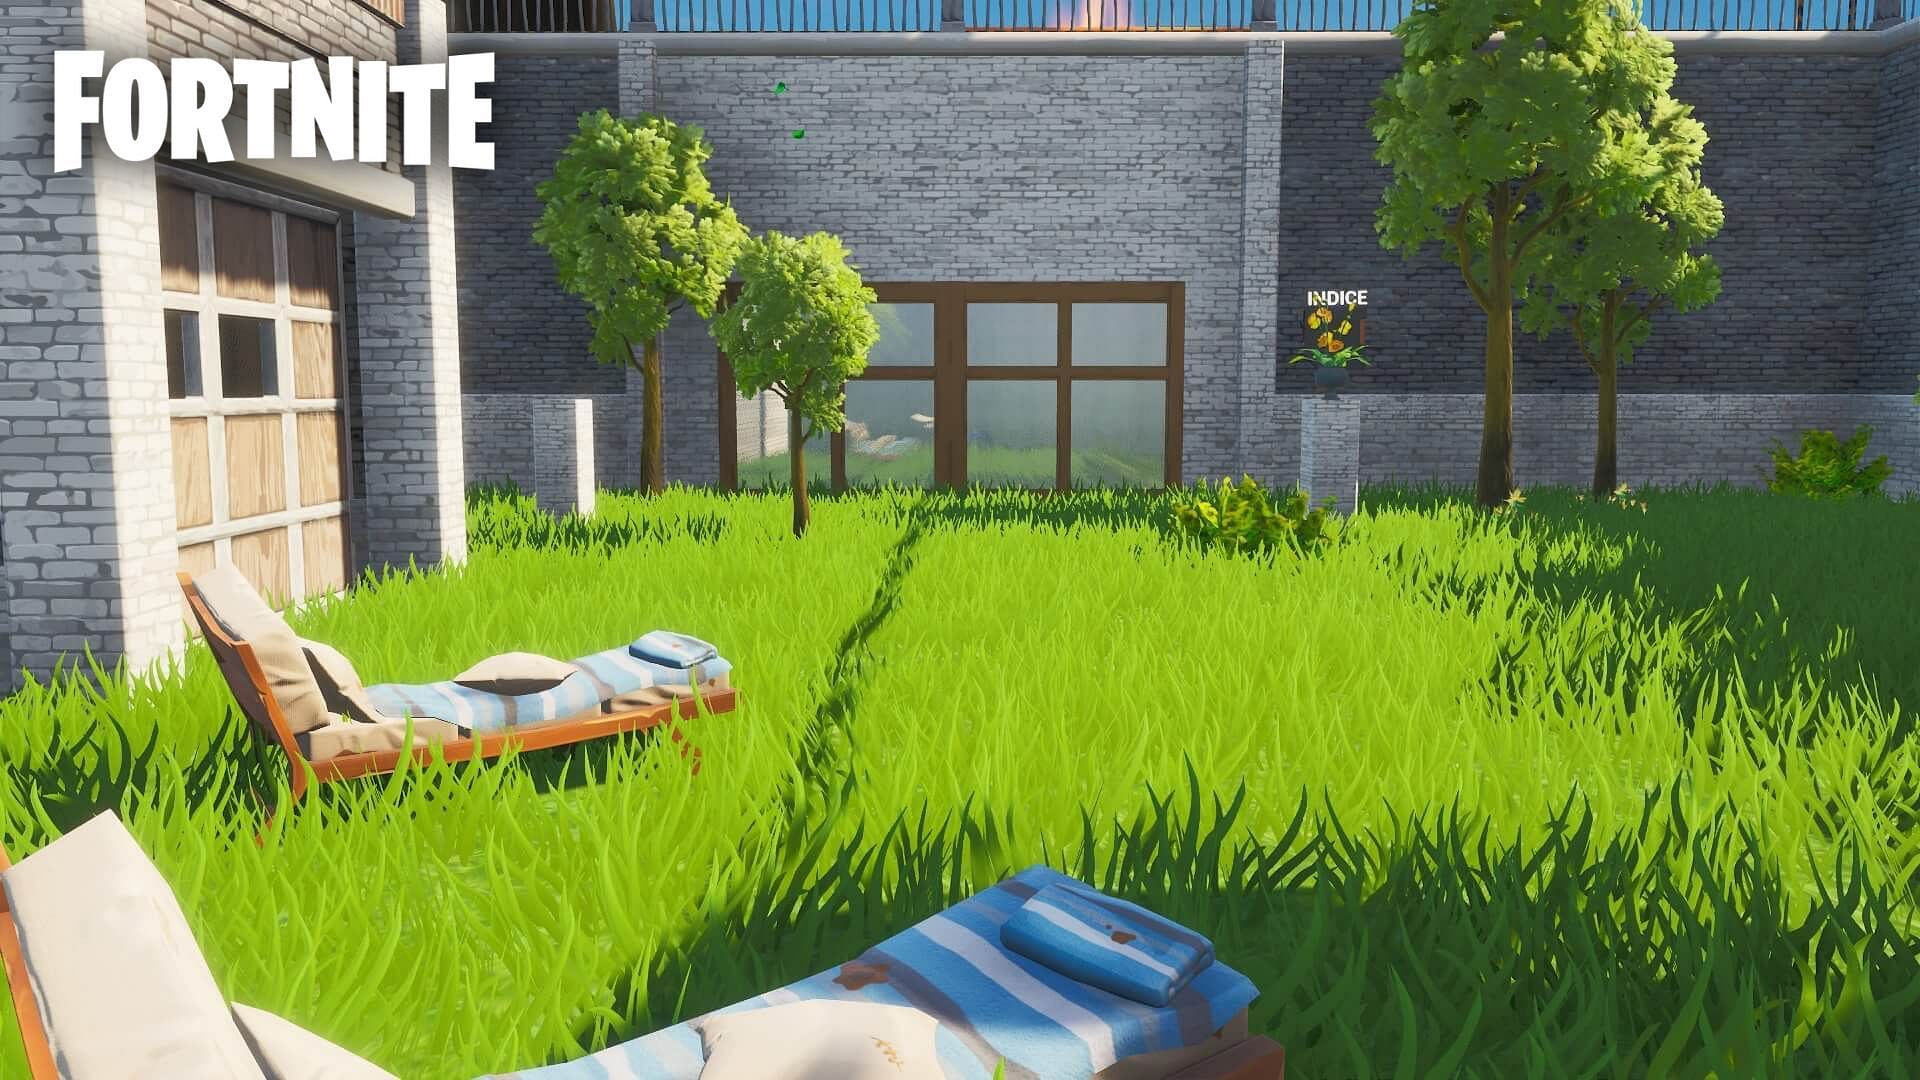 Find the Button Fortnite Creative map is going viral (Image via Dropnite)